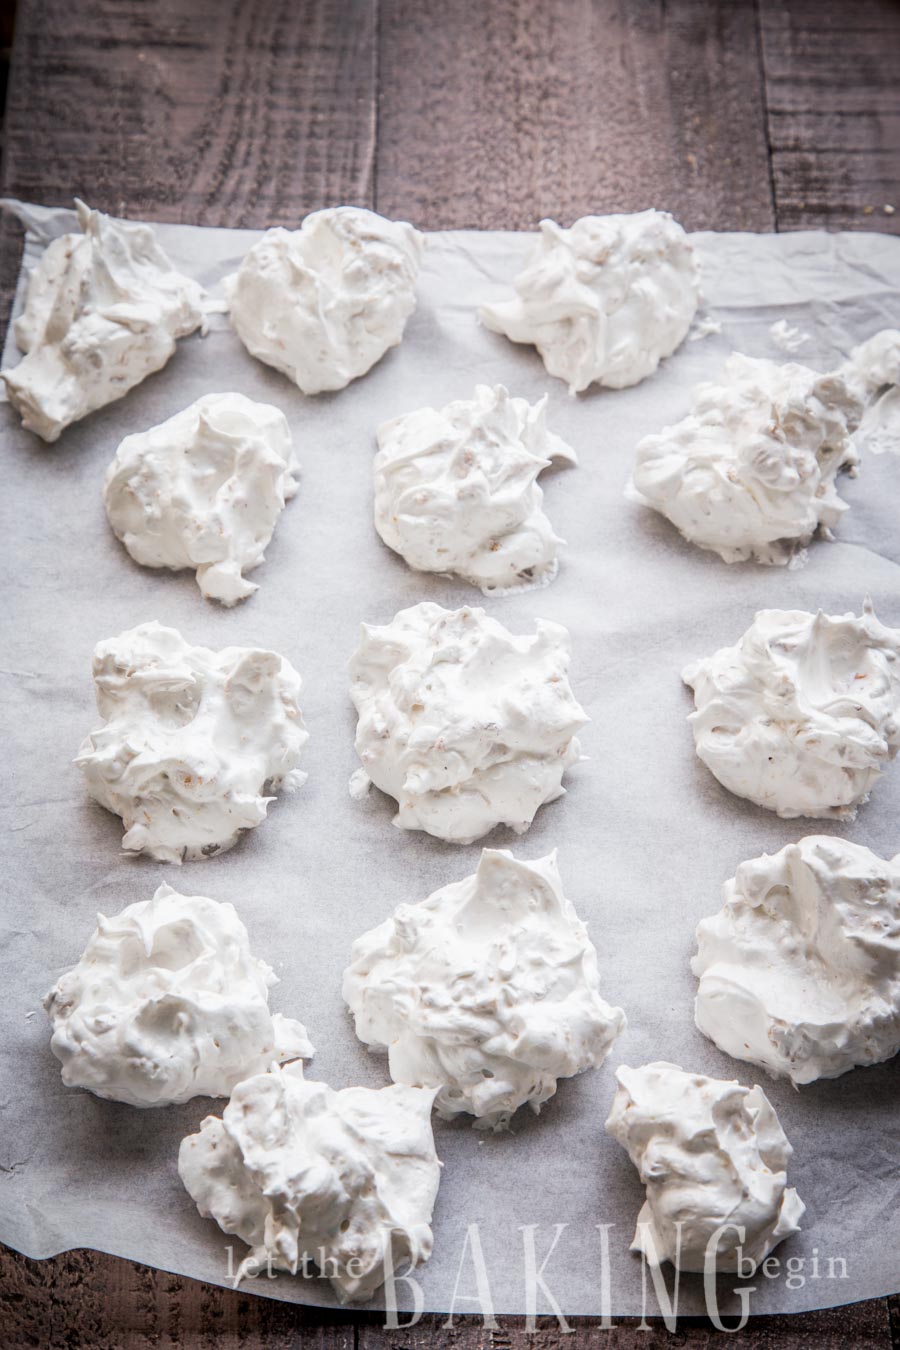 Spooned out hazelnut meringues on a parchment paper on a wooden table.